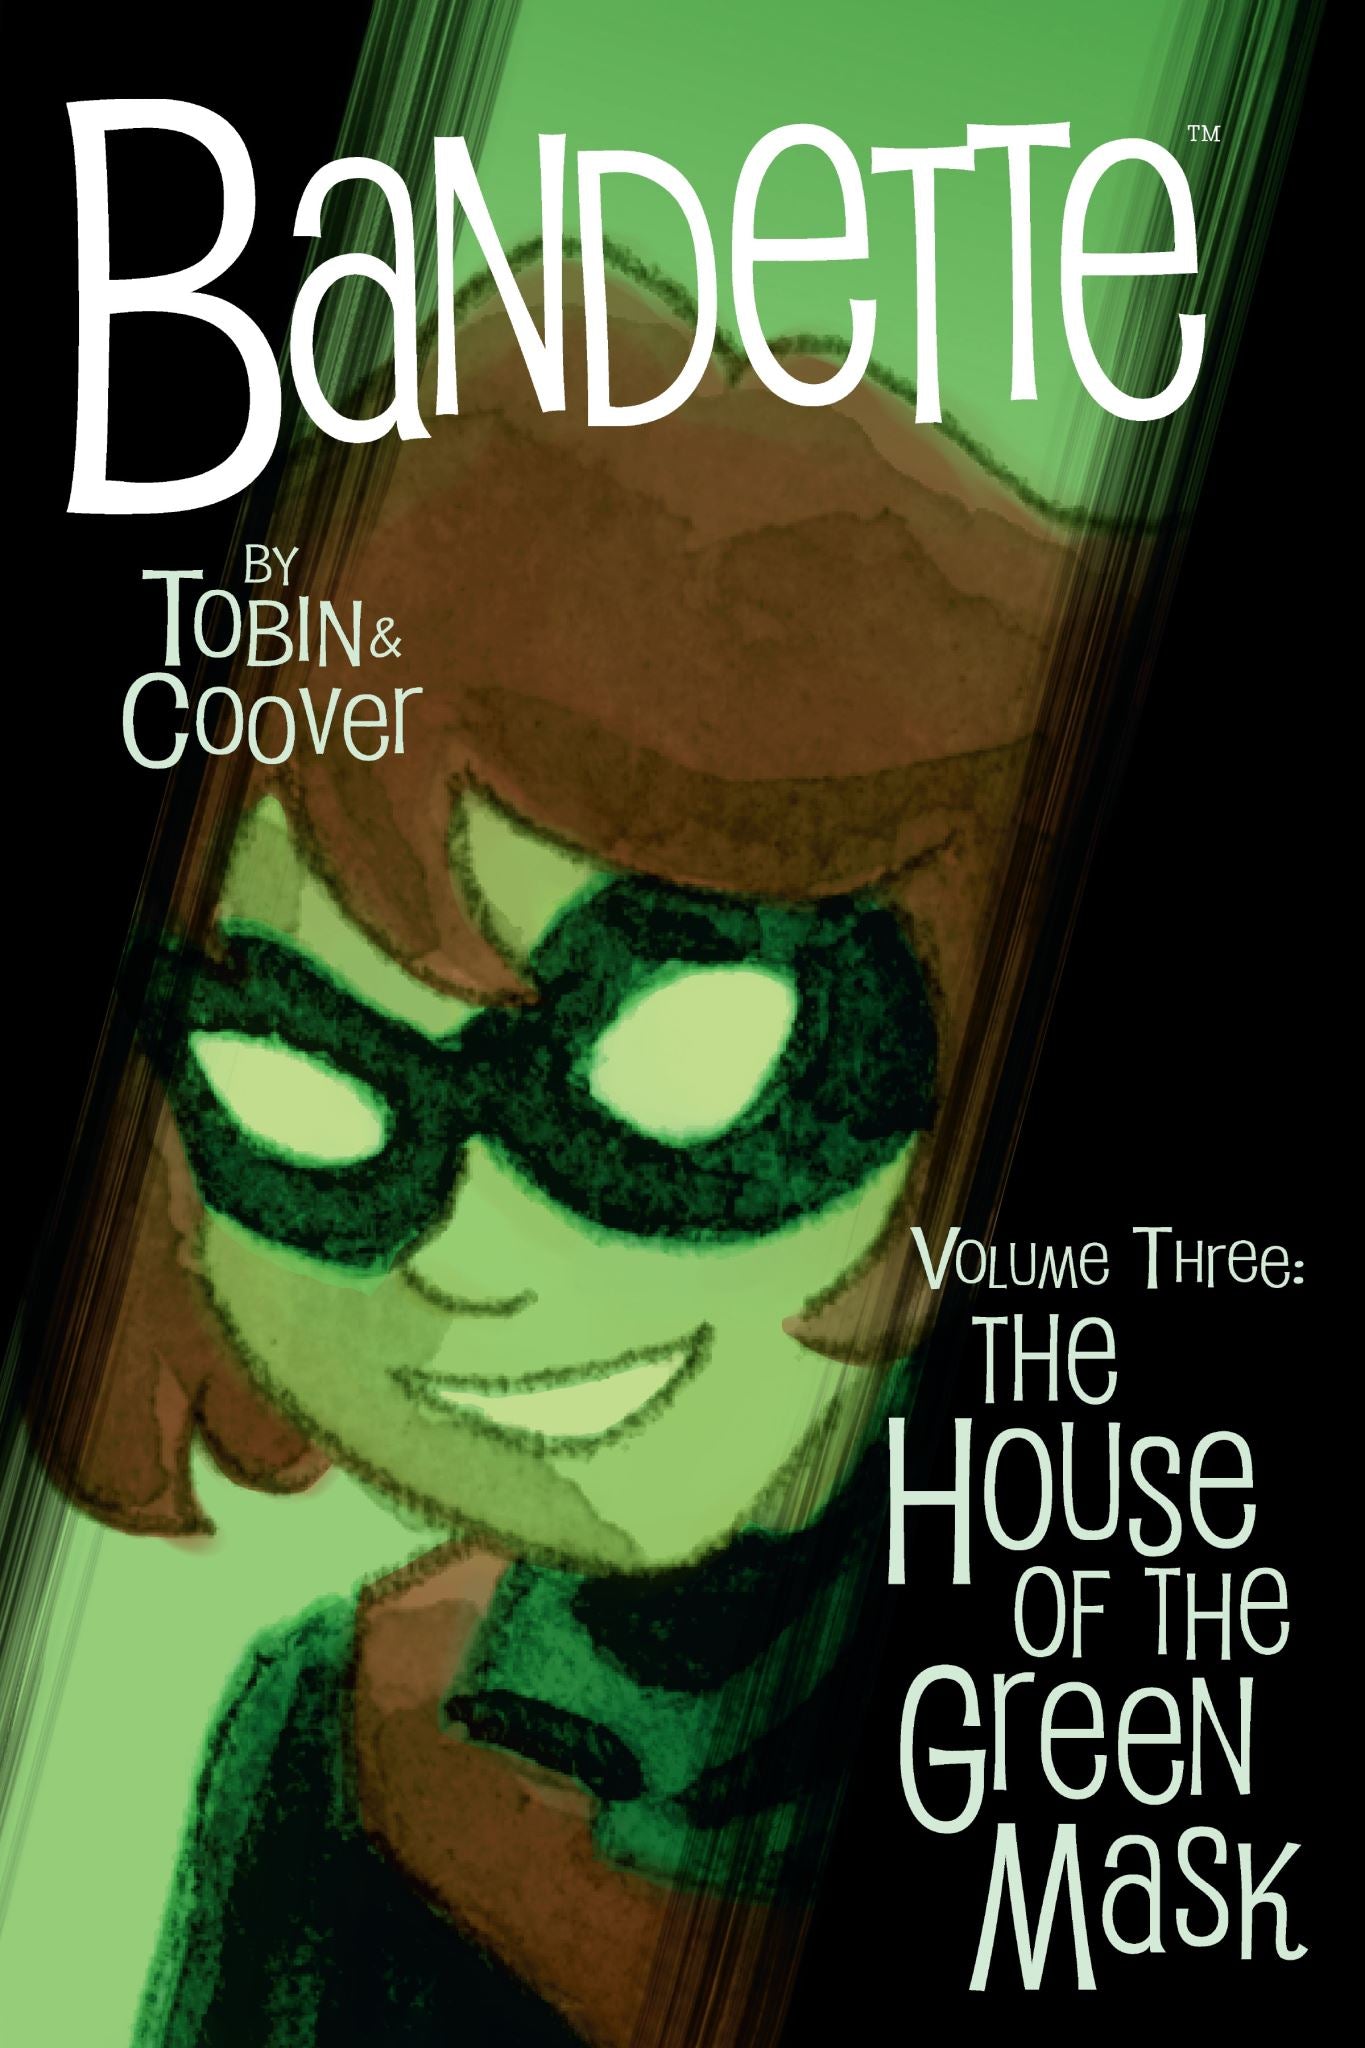 Bandette Volume 3 The House of the Green Mask